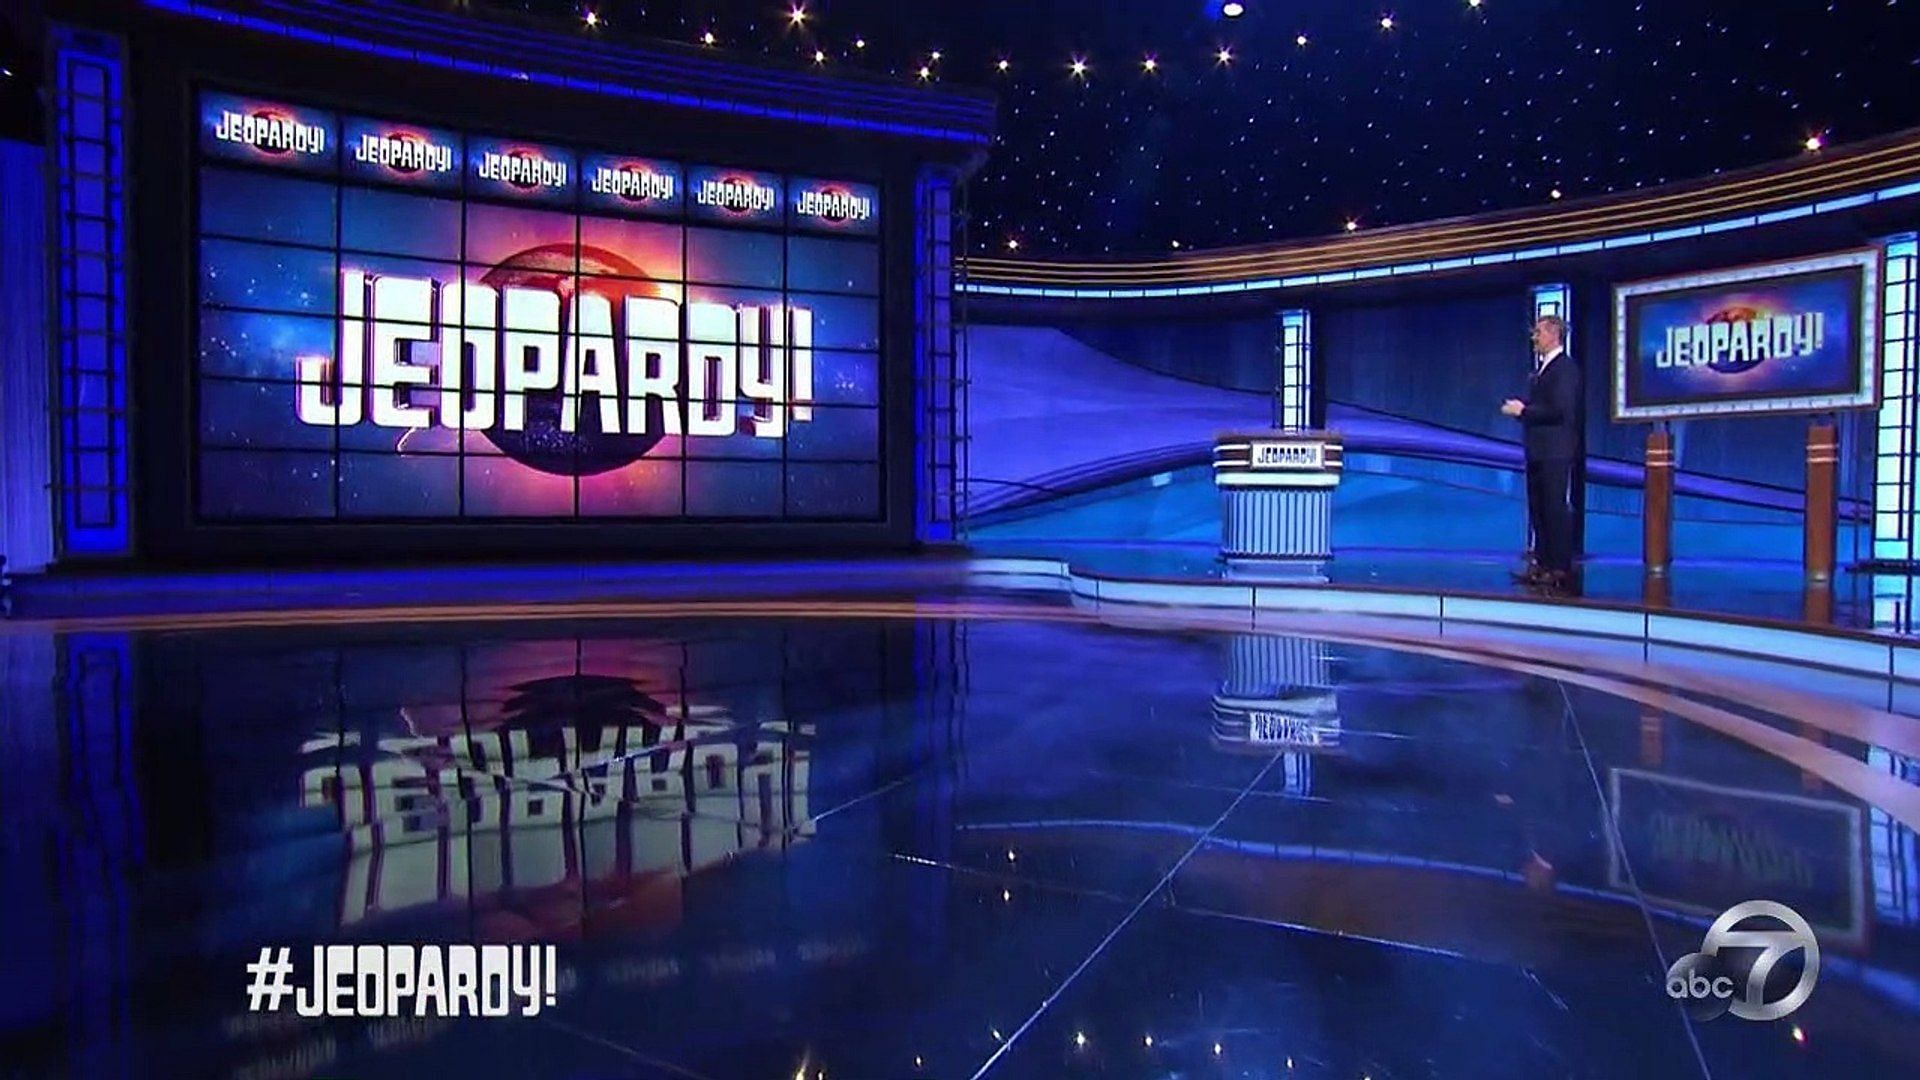 Today's Final Jeopardy! answer Tuesday, May 31, 2022